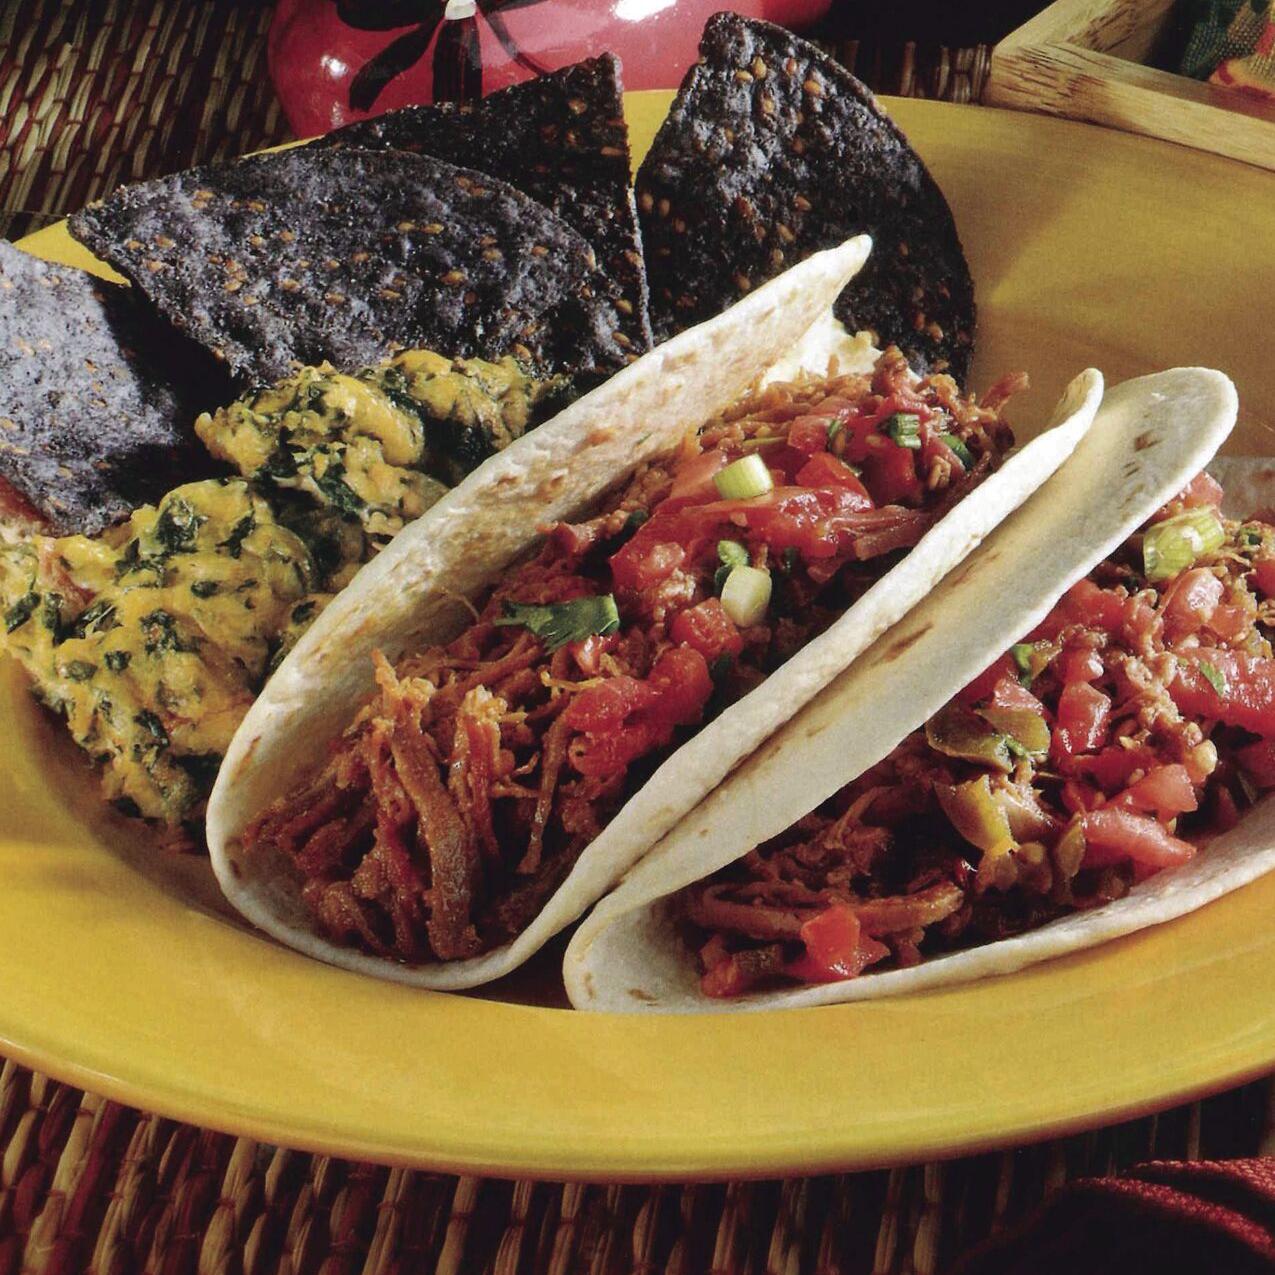 From Tacos To Tequila: Indulging In Mexico’s Delicious Cuisine